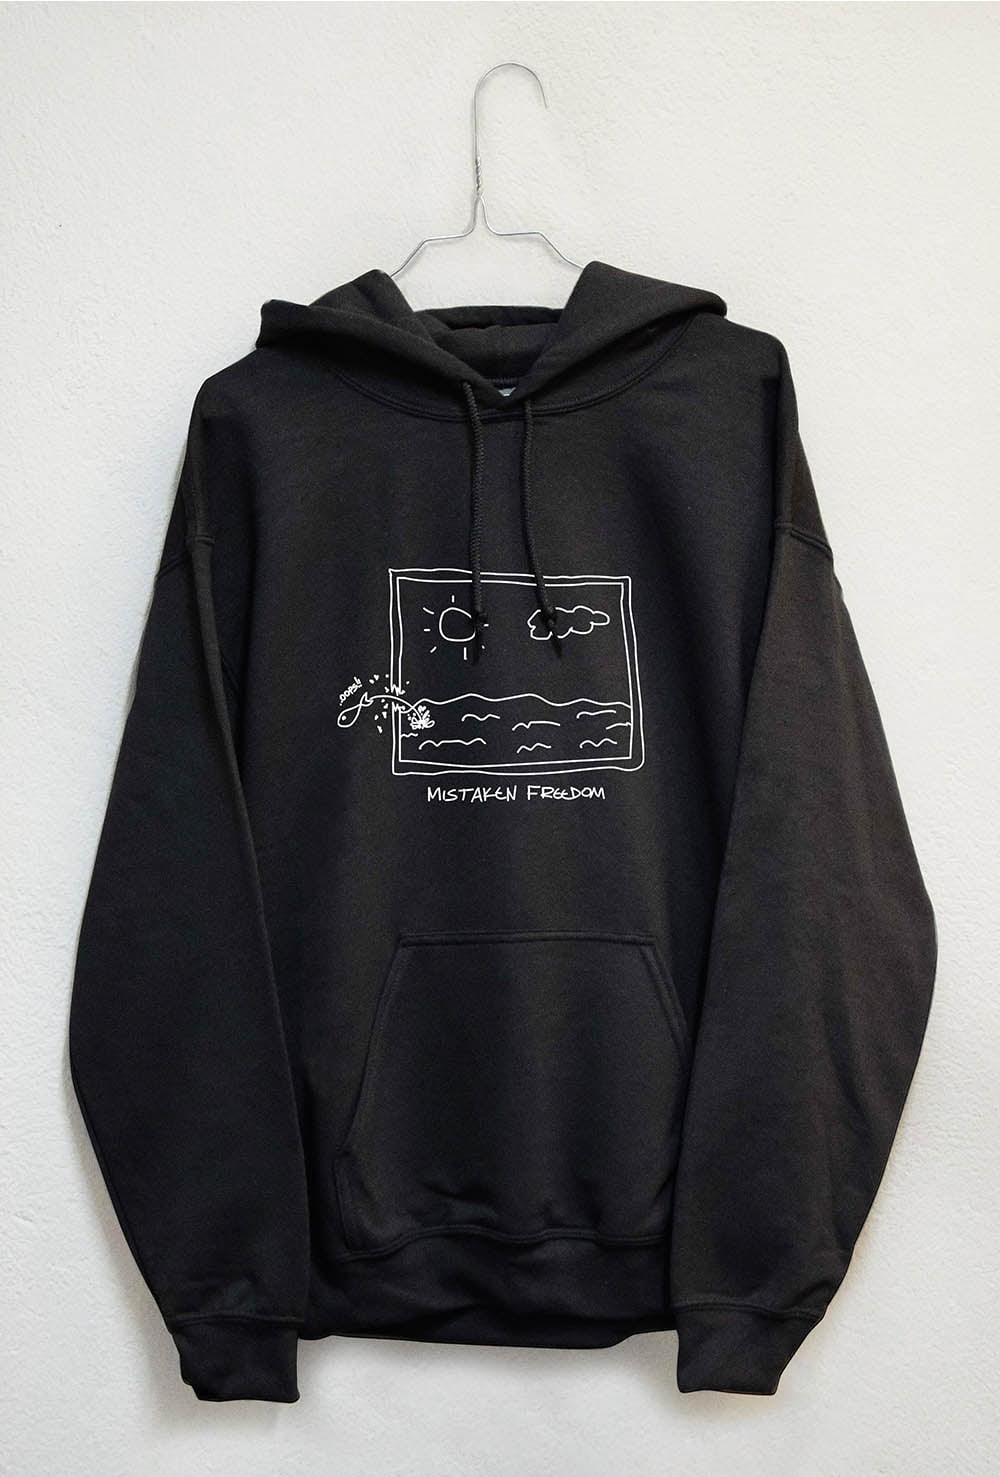 Subworks black hoodie with a framed fish..Mistaken Freedom